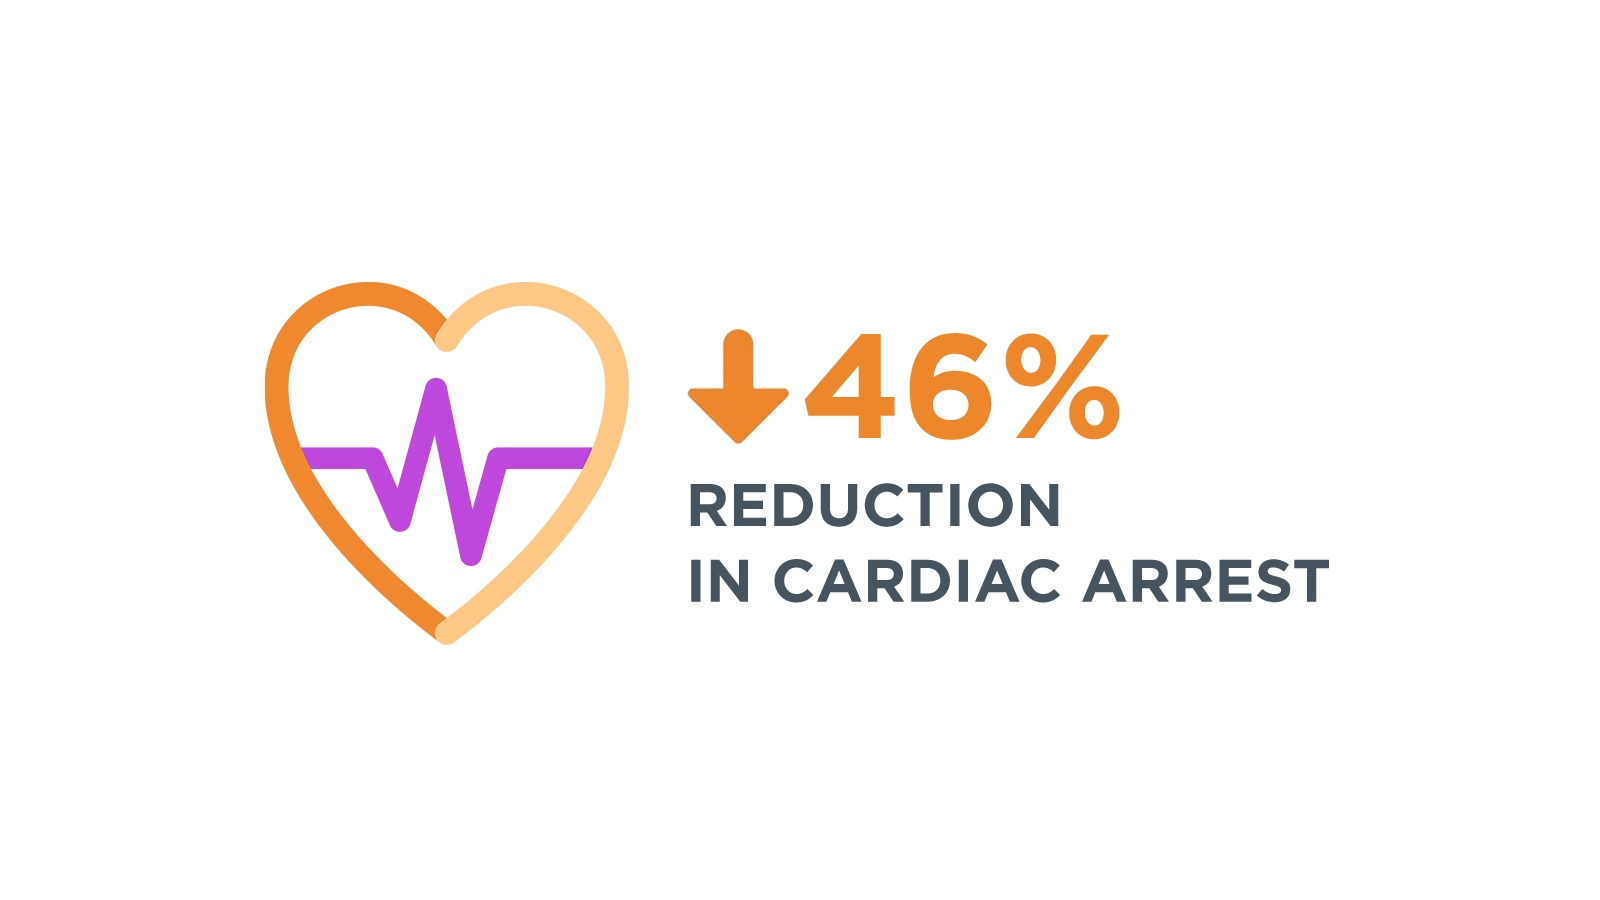 Infographic: Patients with AFib have an increased risk for life-threatening complications, including up to 2x increase in cardiovascular mortality. Talk to your doctor about potential AFib risks and AFib treatment options.